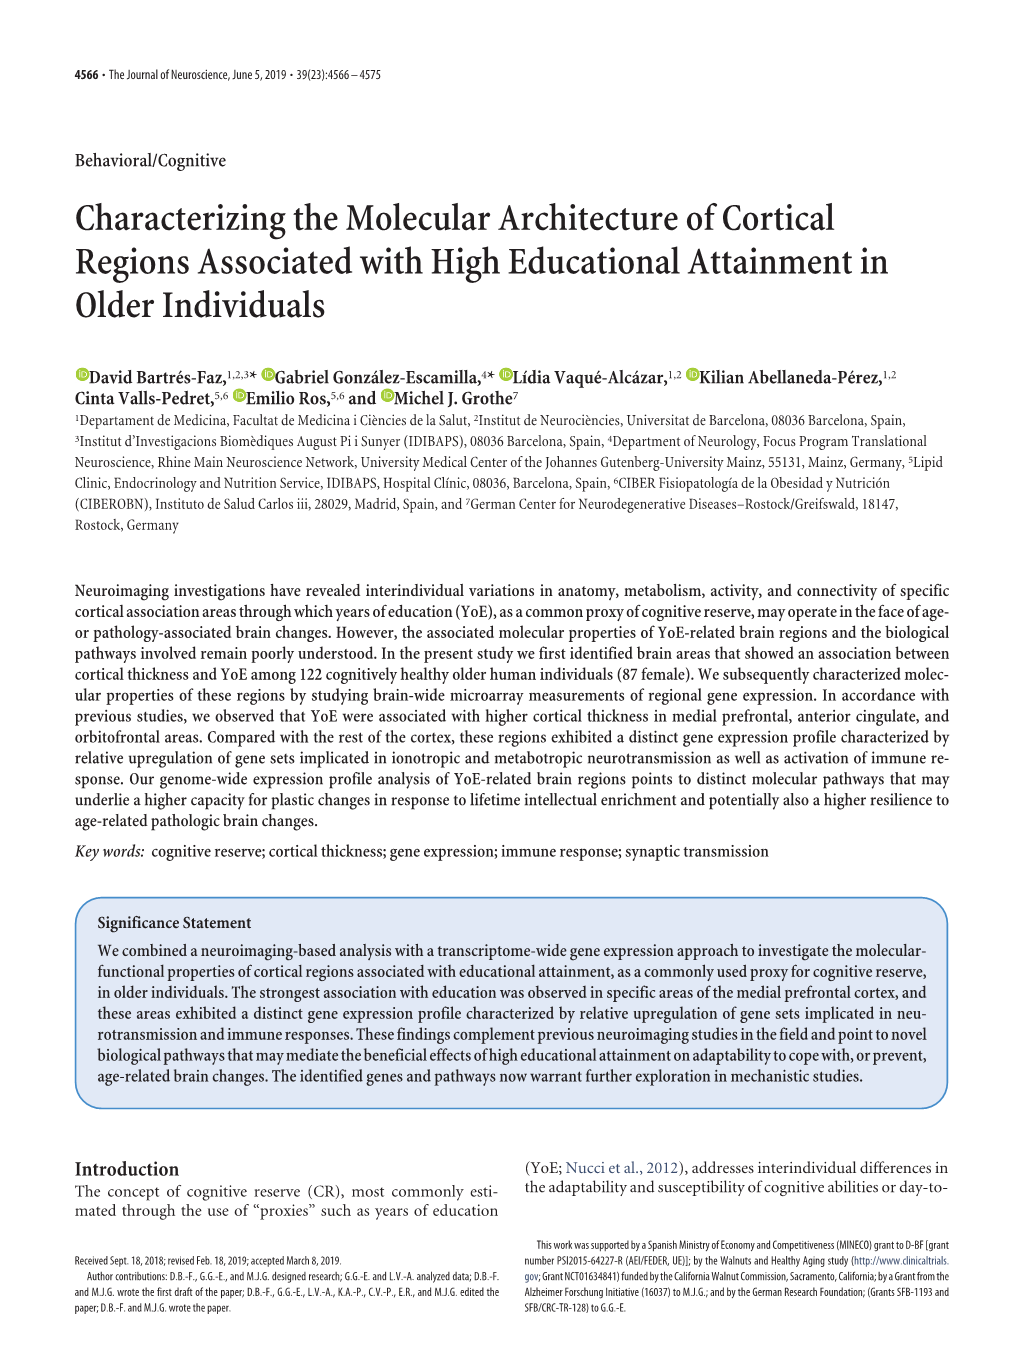 Characterizing the Molecular Architecture of Cortical Regions Associated with High Educational Attainment in Older Individuals